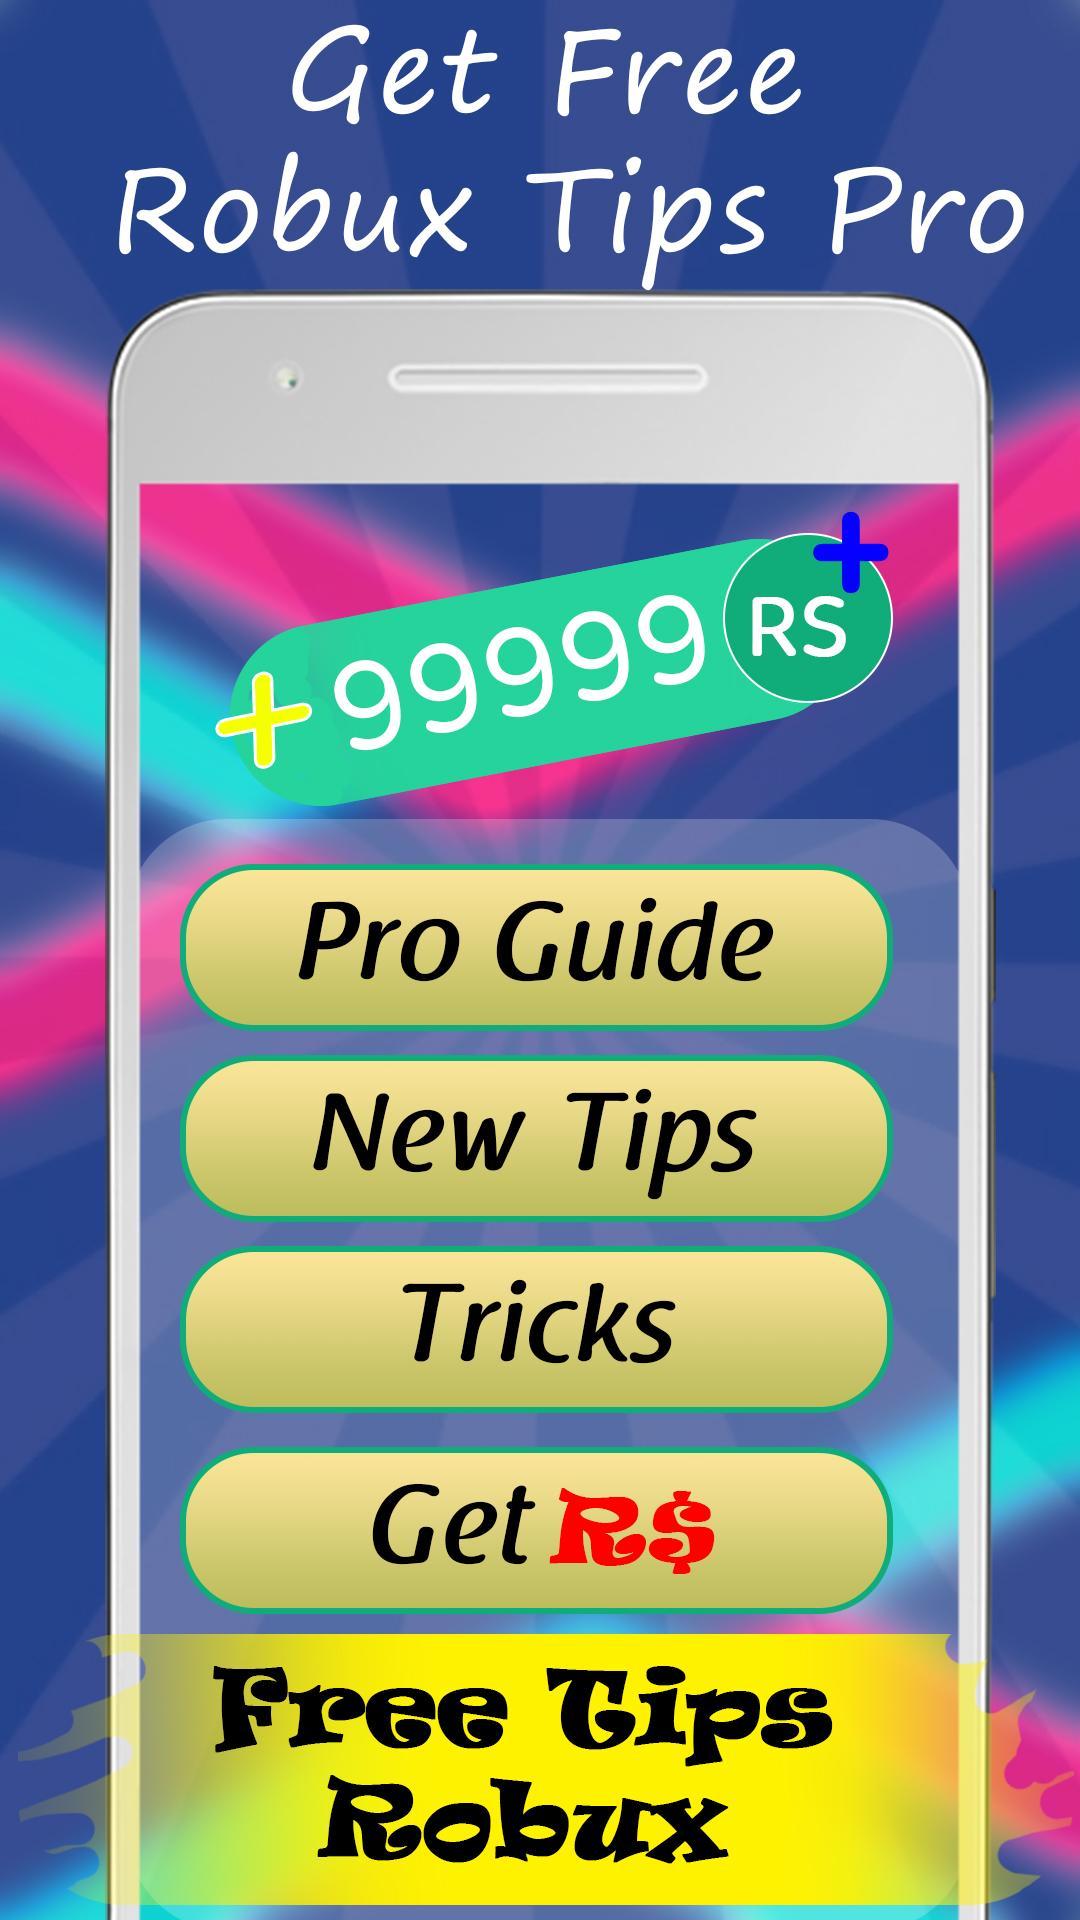 Get New Free Tips Robux For Roblox Guide 2k19 For Android Apk Download - new roblox robux best guide for android apk download